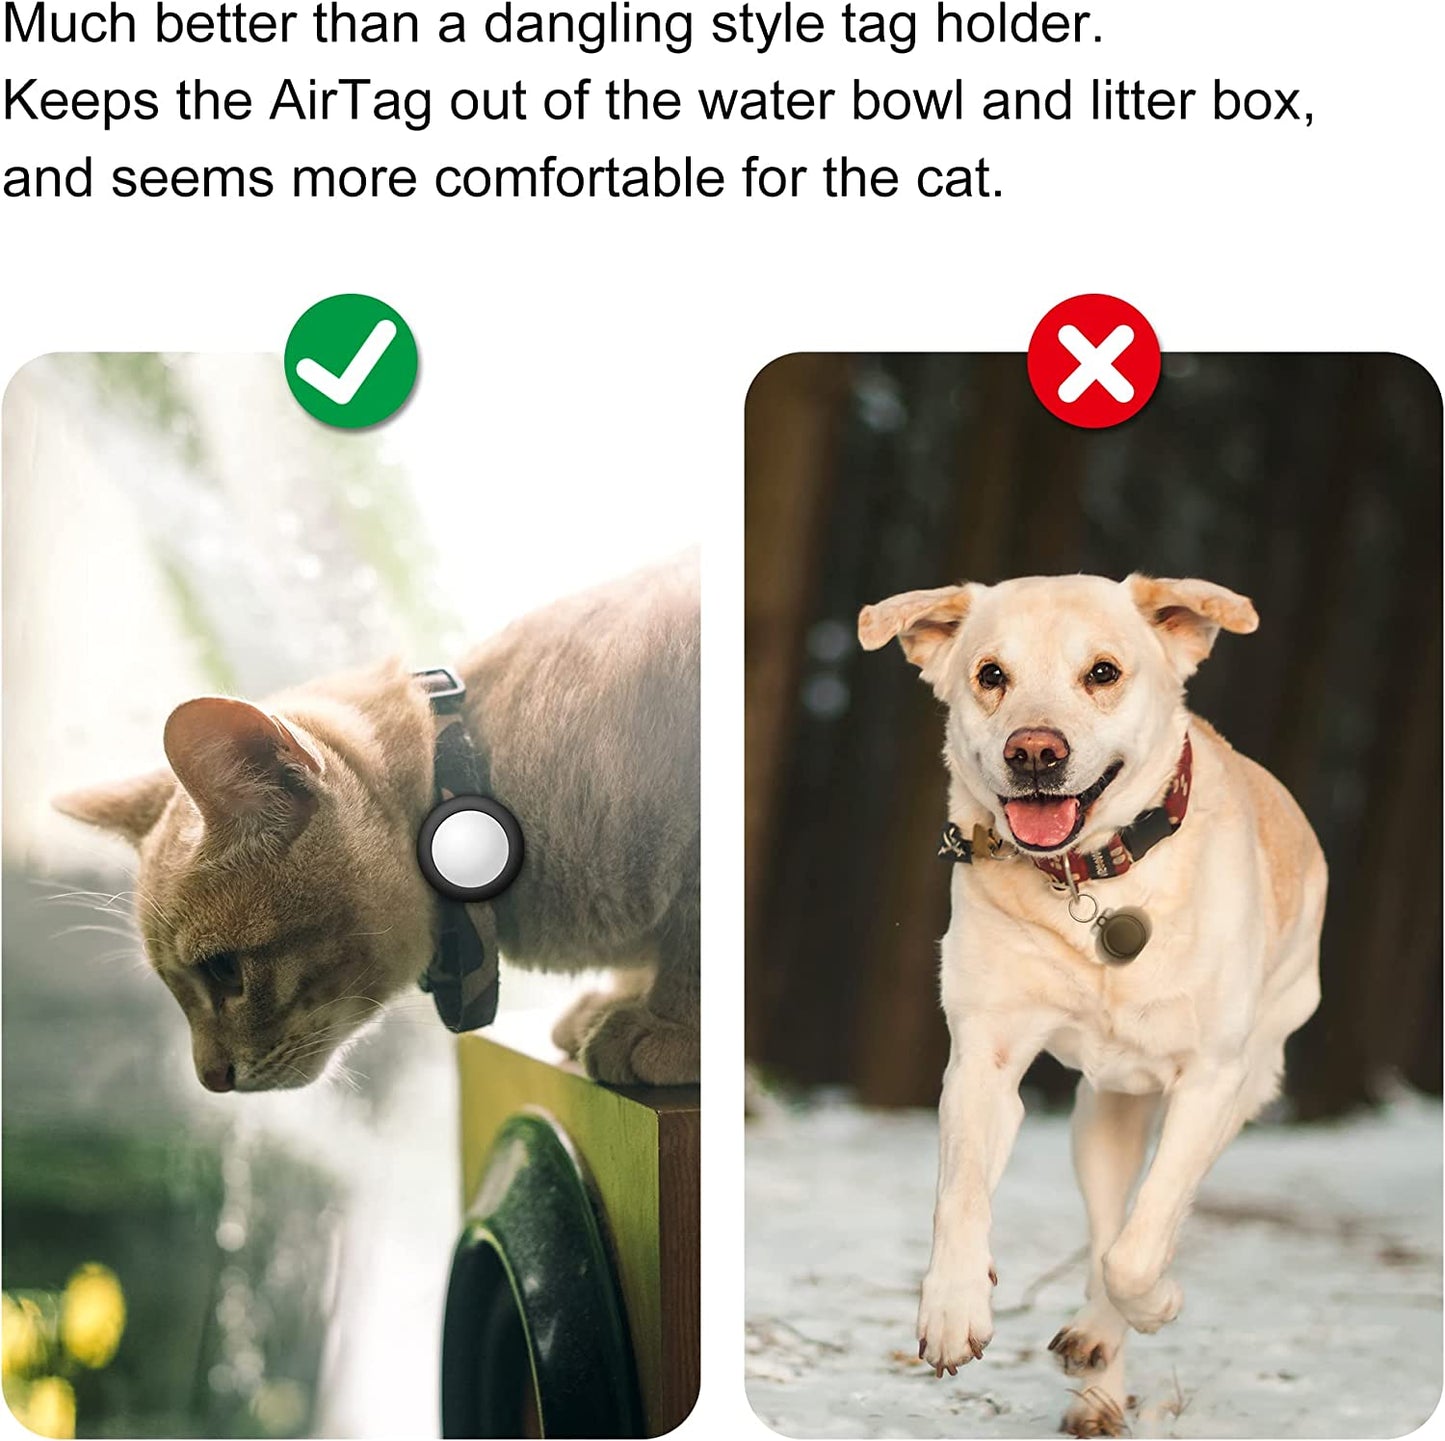 Airtag Cat Collar Holder for Apple Air Tag, 2 Pack Waterproof Case Cover for Cat Dog Collar with 3/8 Inch, Compatible with Cat Dog Collars Charms Electronics > GPS Accessories > GPS Cases DLENP   